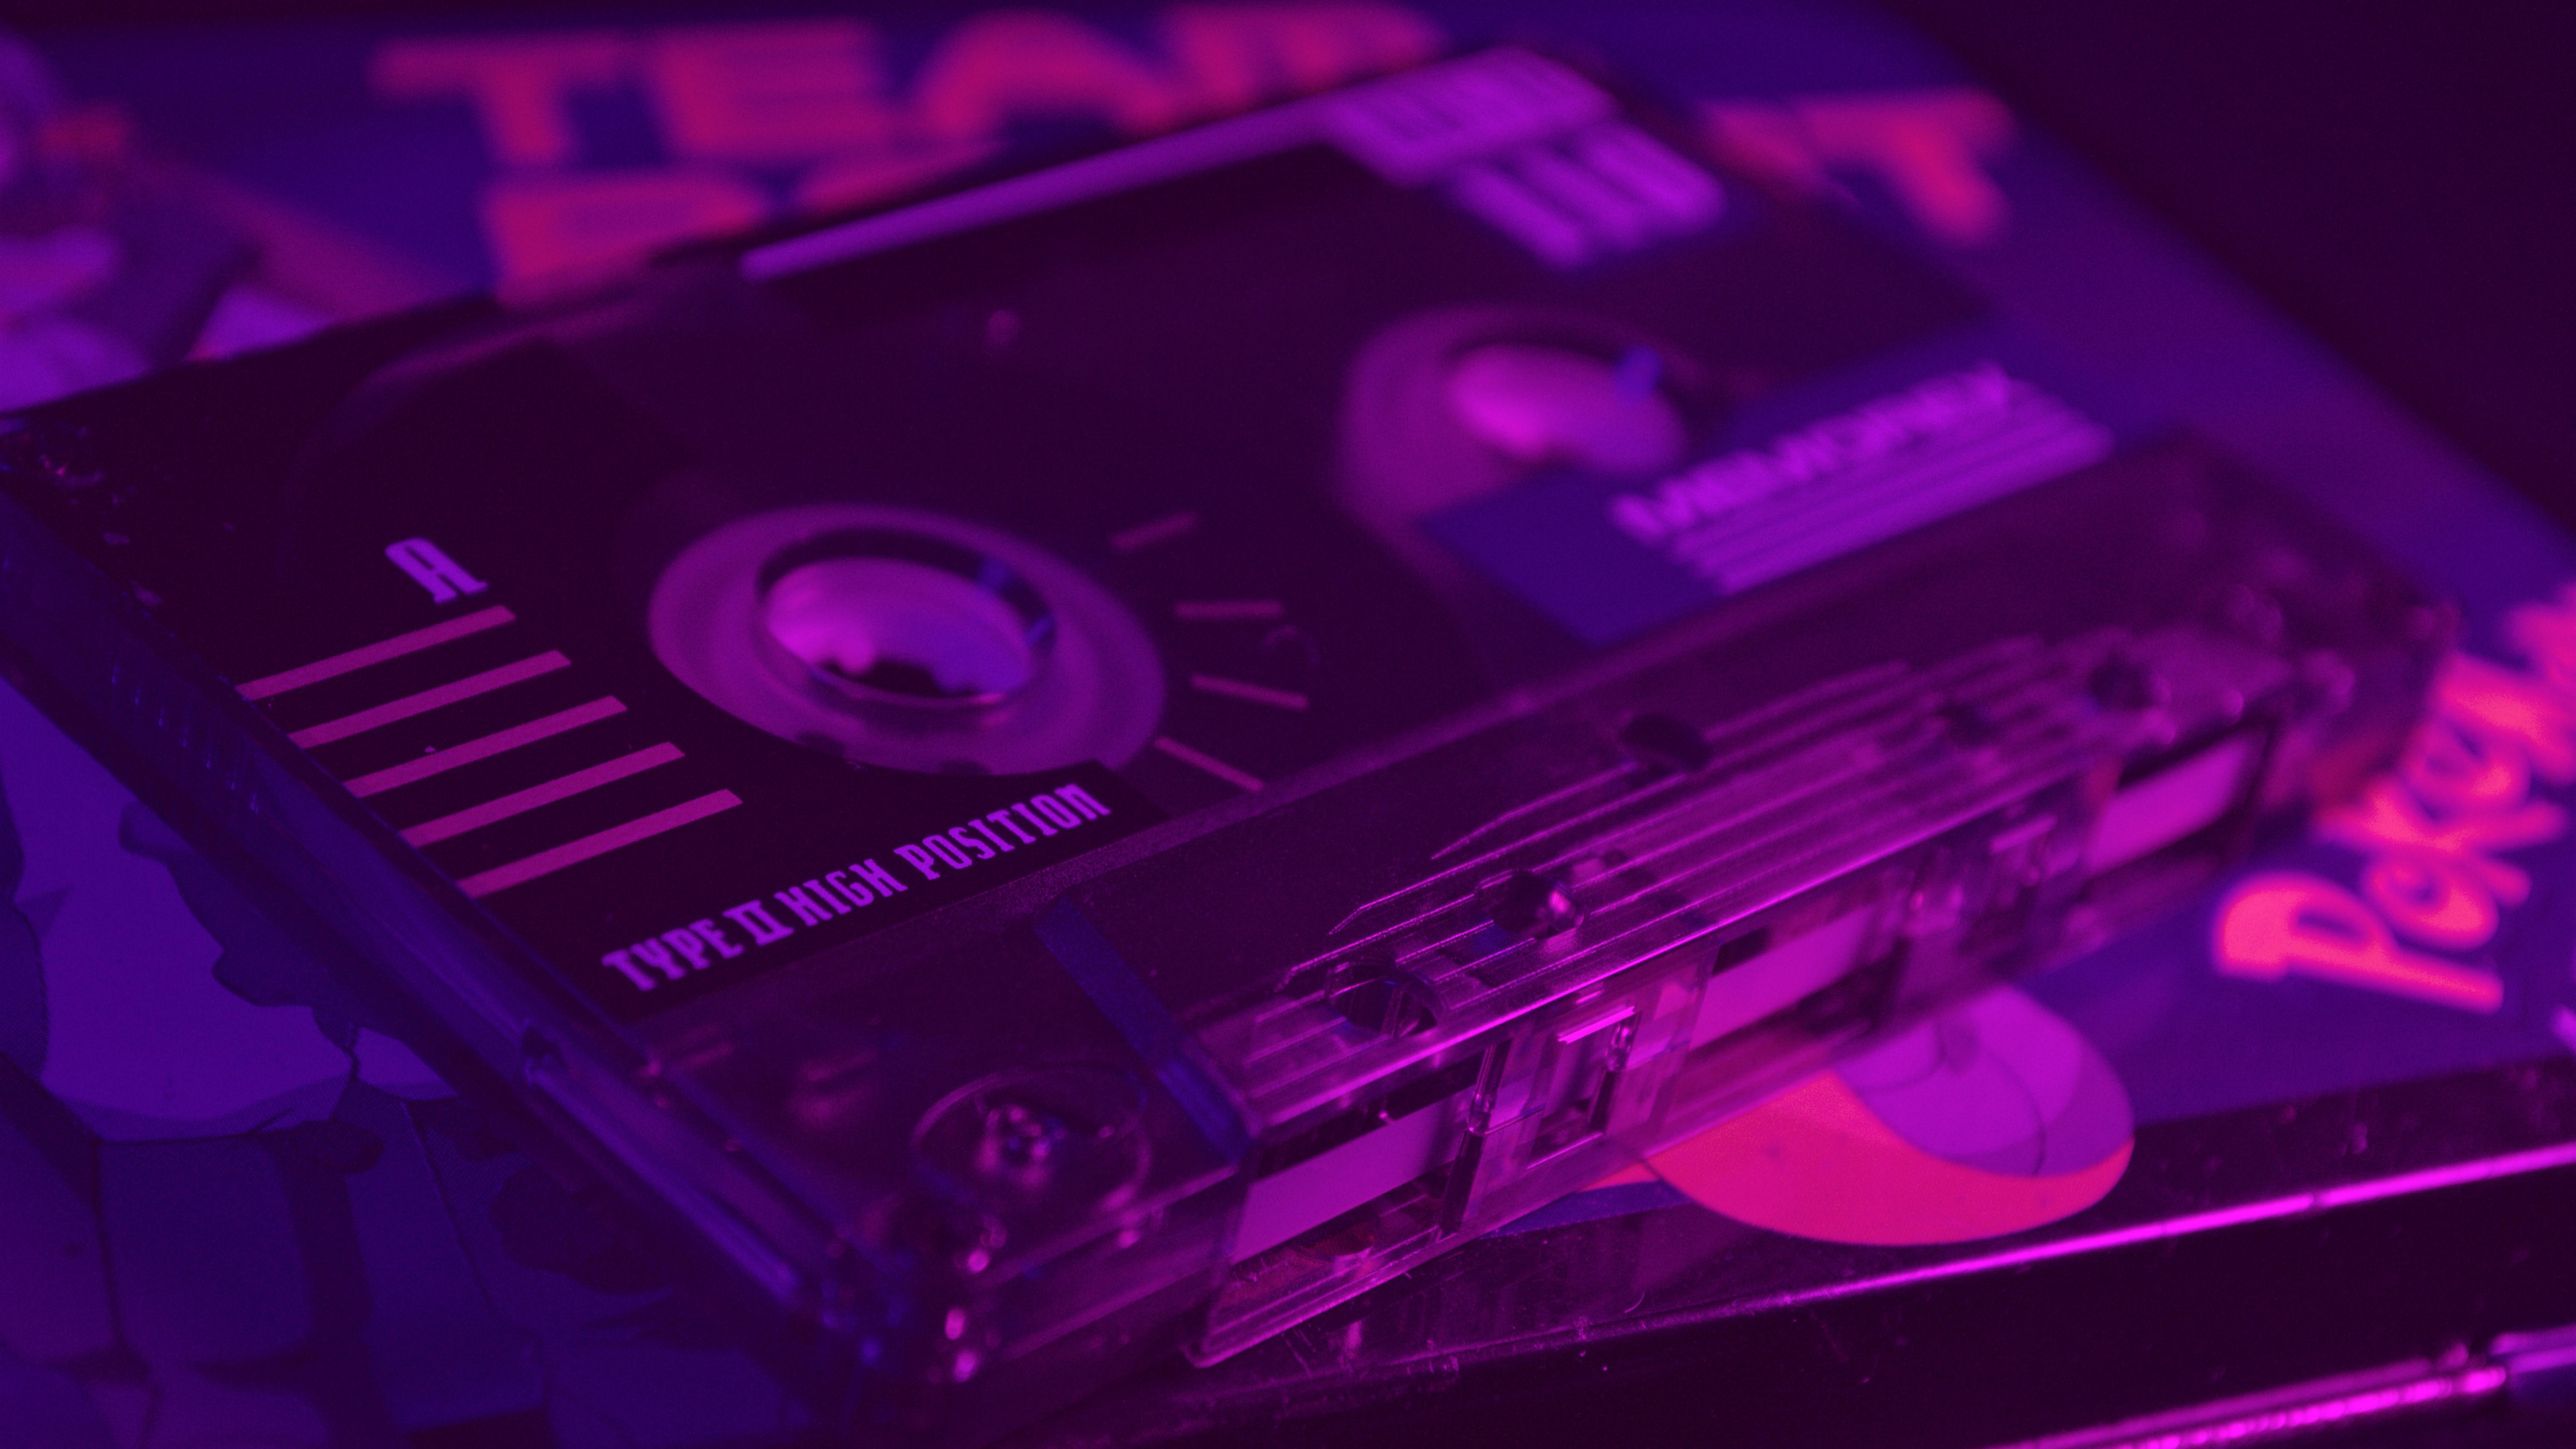 A purple and pink neon light shines on a stack of cassette tapes. - Bisexual